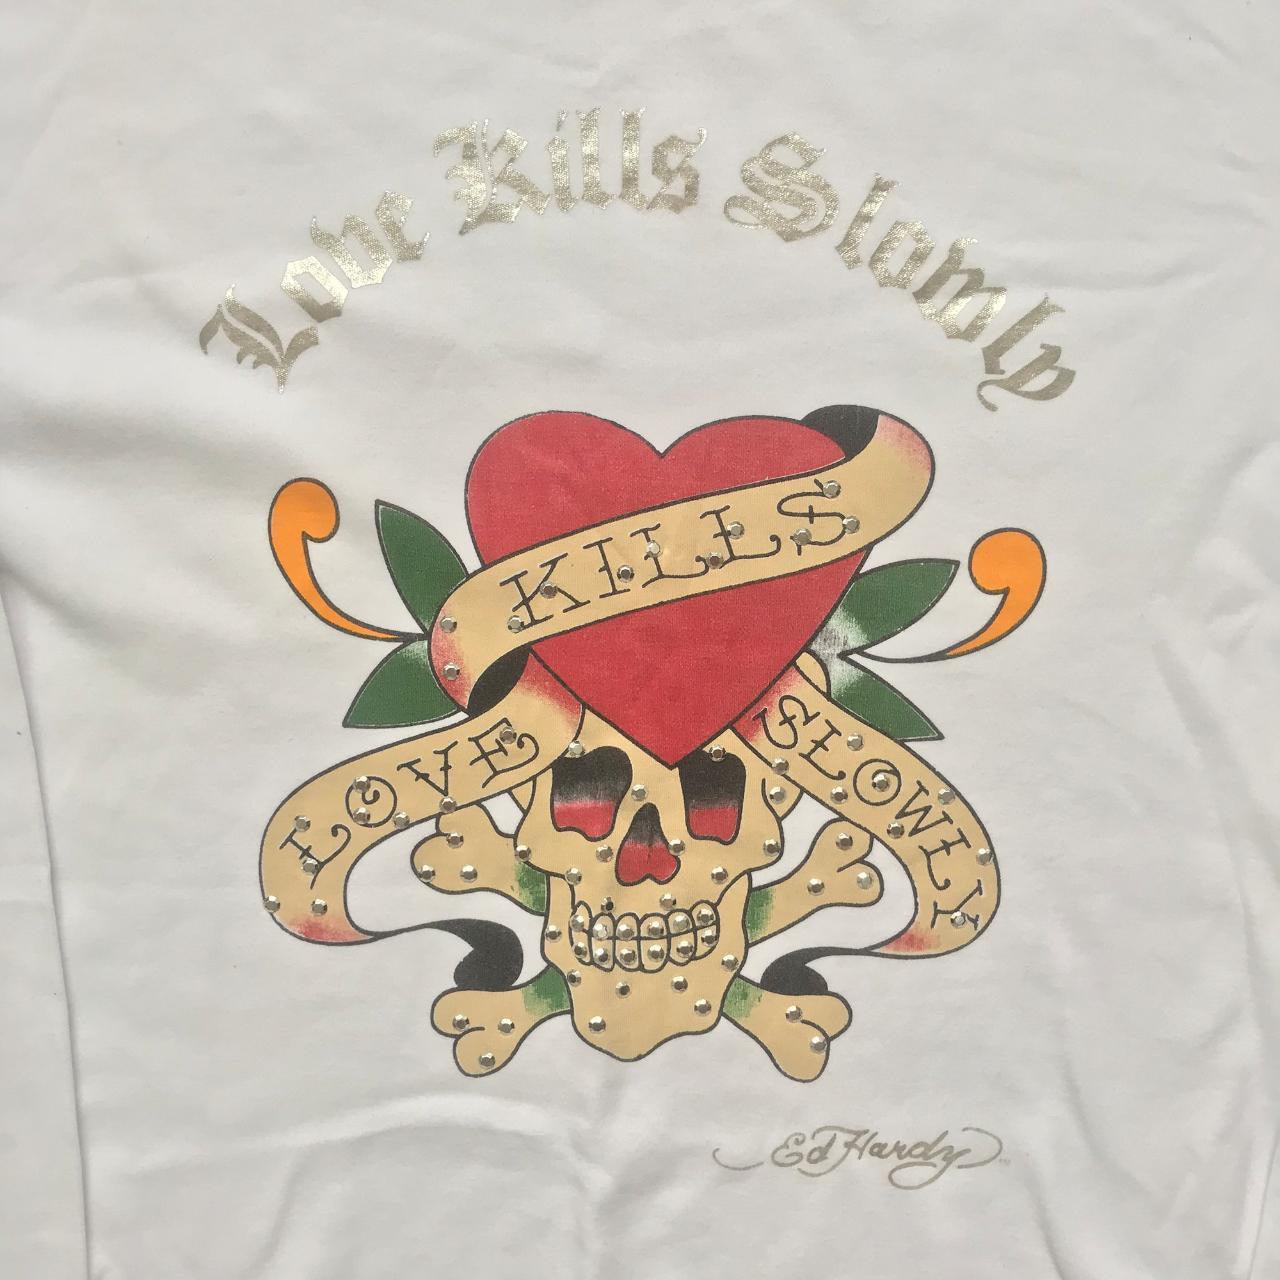 Ed Hardy Long-sleeve T-shirt - XL - Known Source